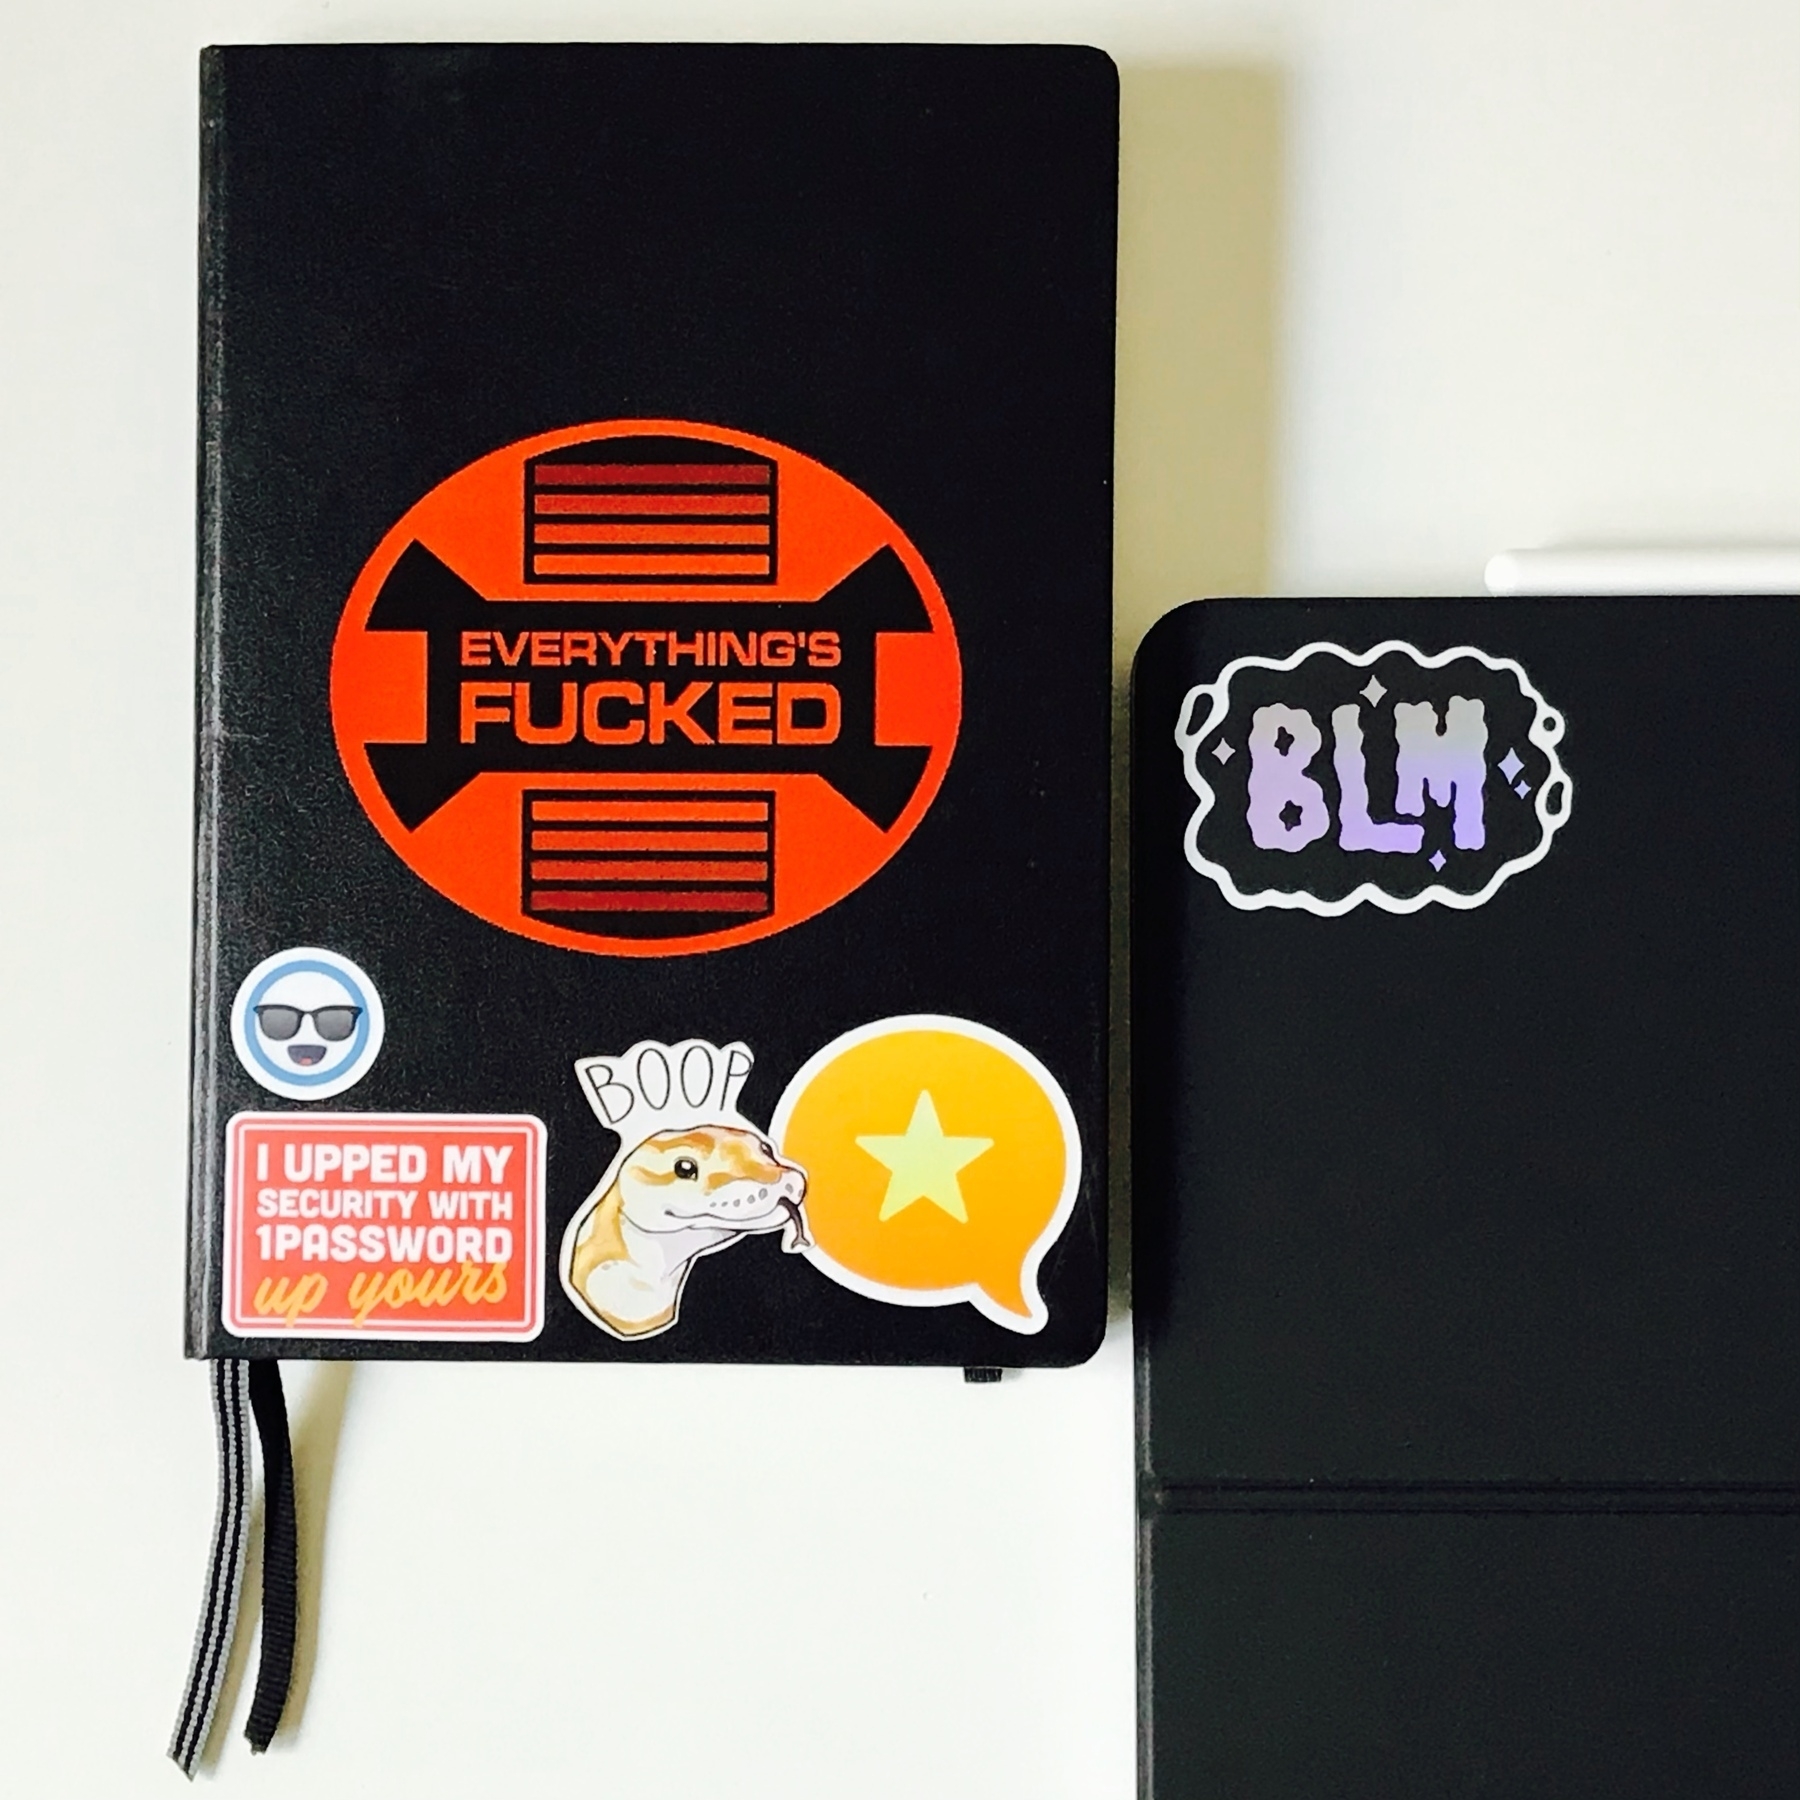 Bound black paper notebook with a few stickers on it. Next to it on the right, the top-left corner of an iPad Pro in a Magic Keyboard cover, a singular shiny BLM (Black Lives Matter) sticker on it.